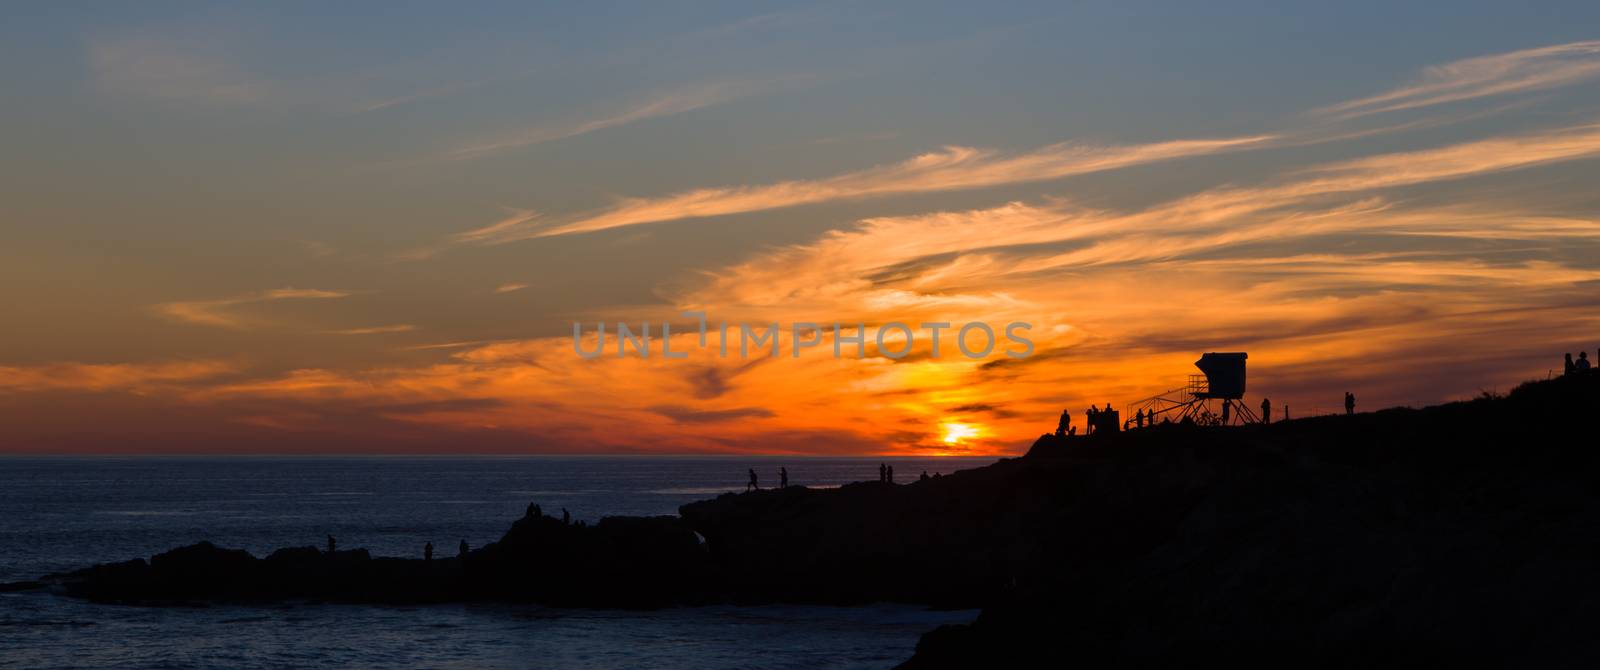 Silhouette of Pacifc Coast Sunset by wolterk